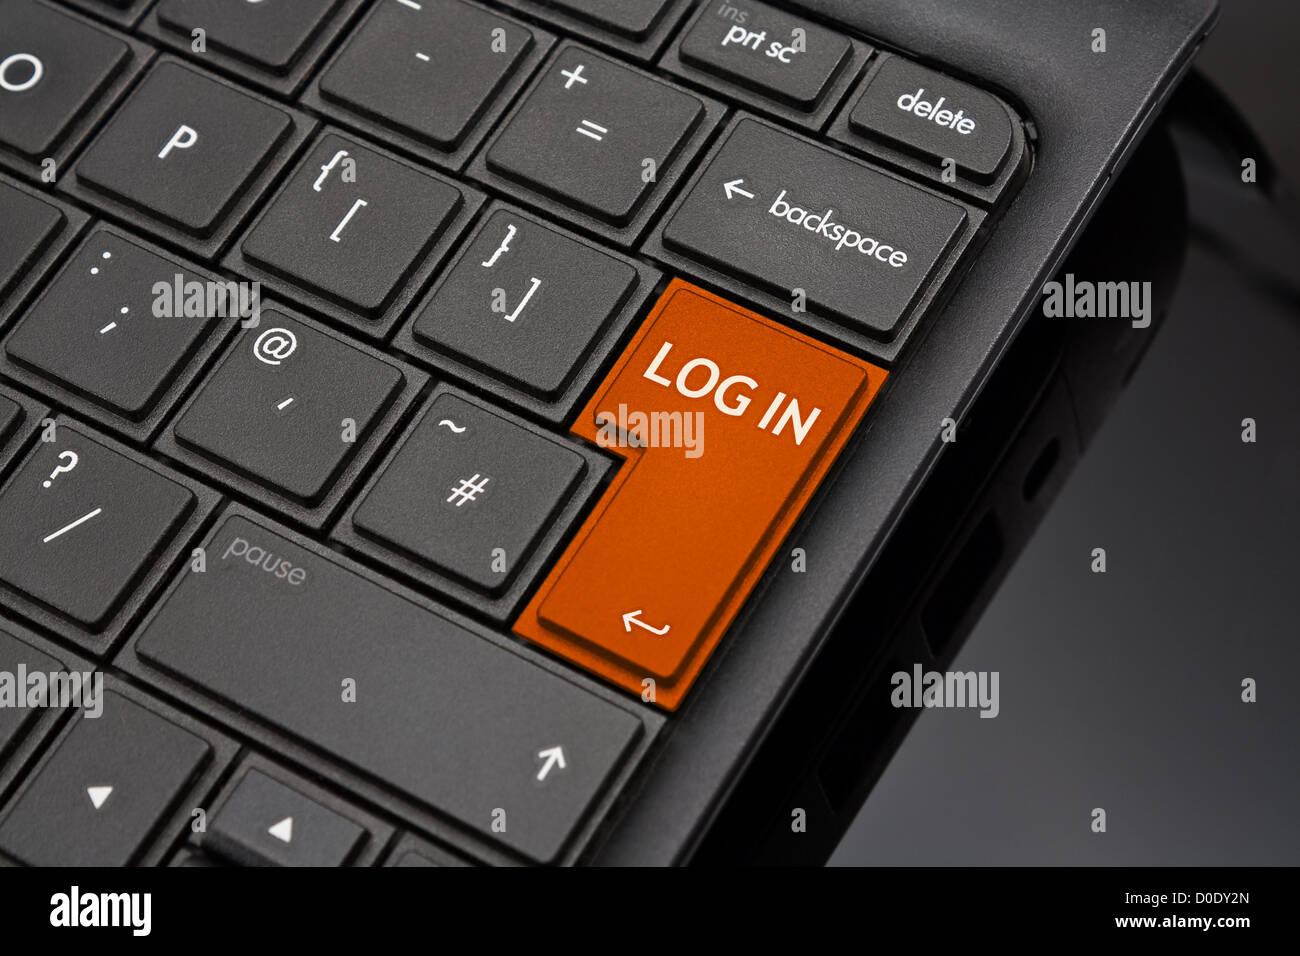 Log in Return Key symbolizing the logging in to an account online after entering username and password Stock Photo